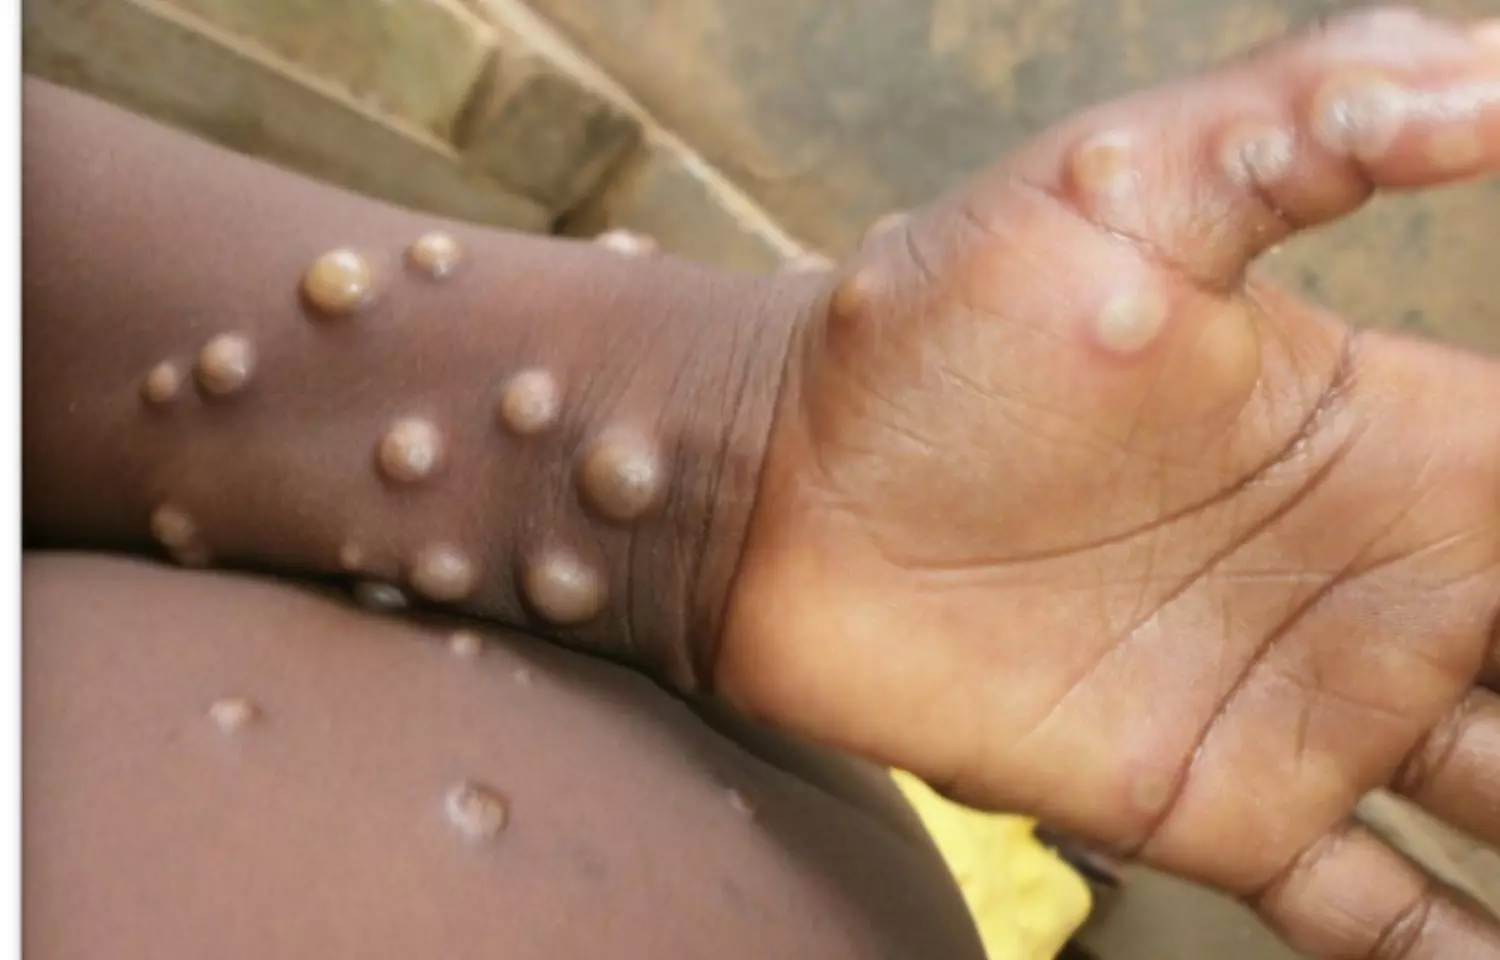 Health Ministry releases Guidelines for Monkeypox Treatment, Details